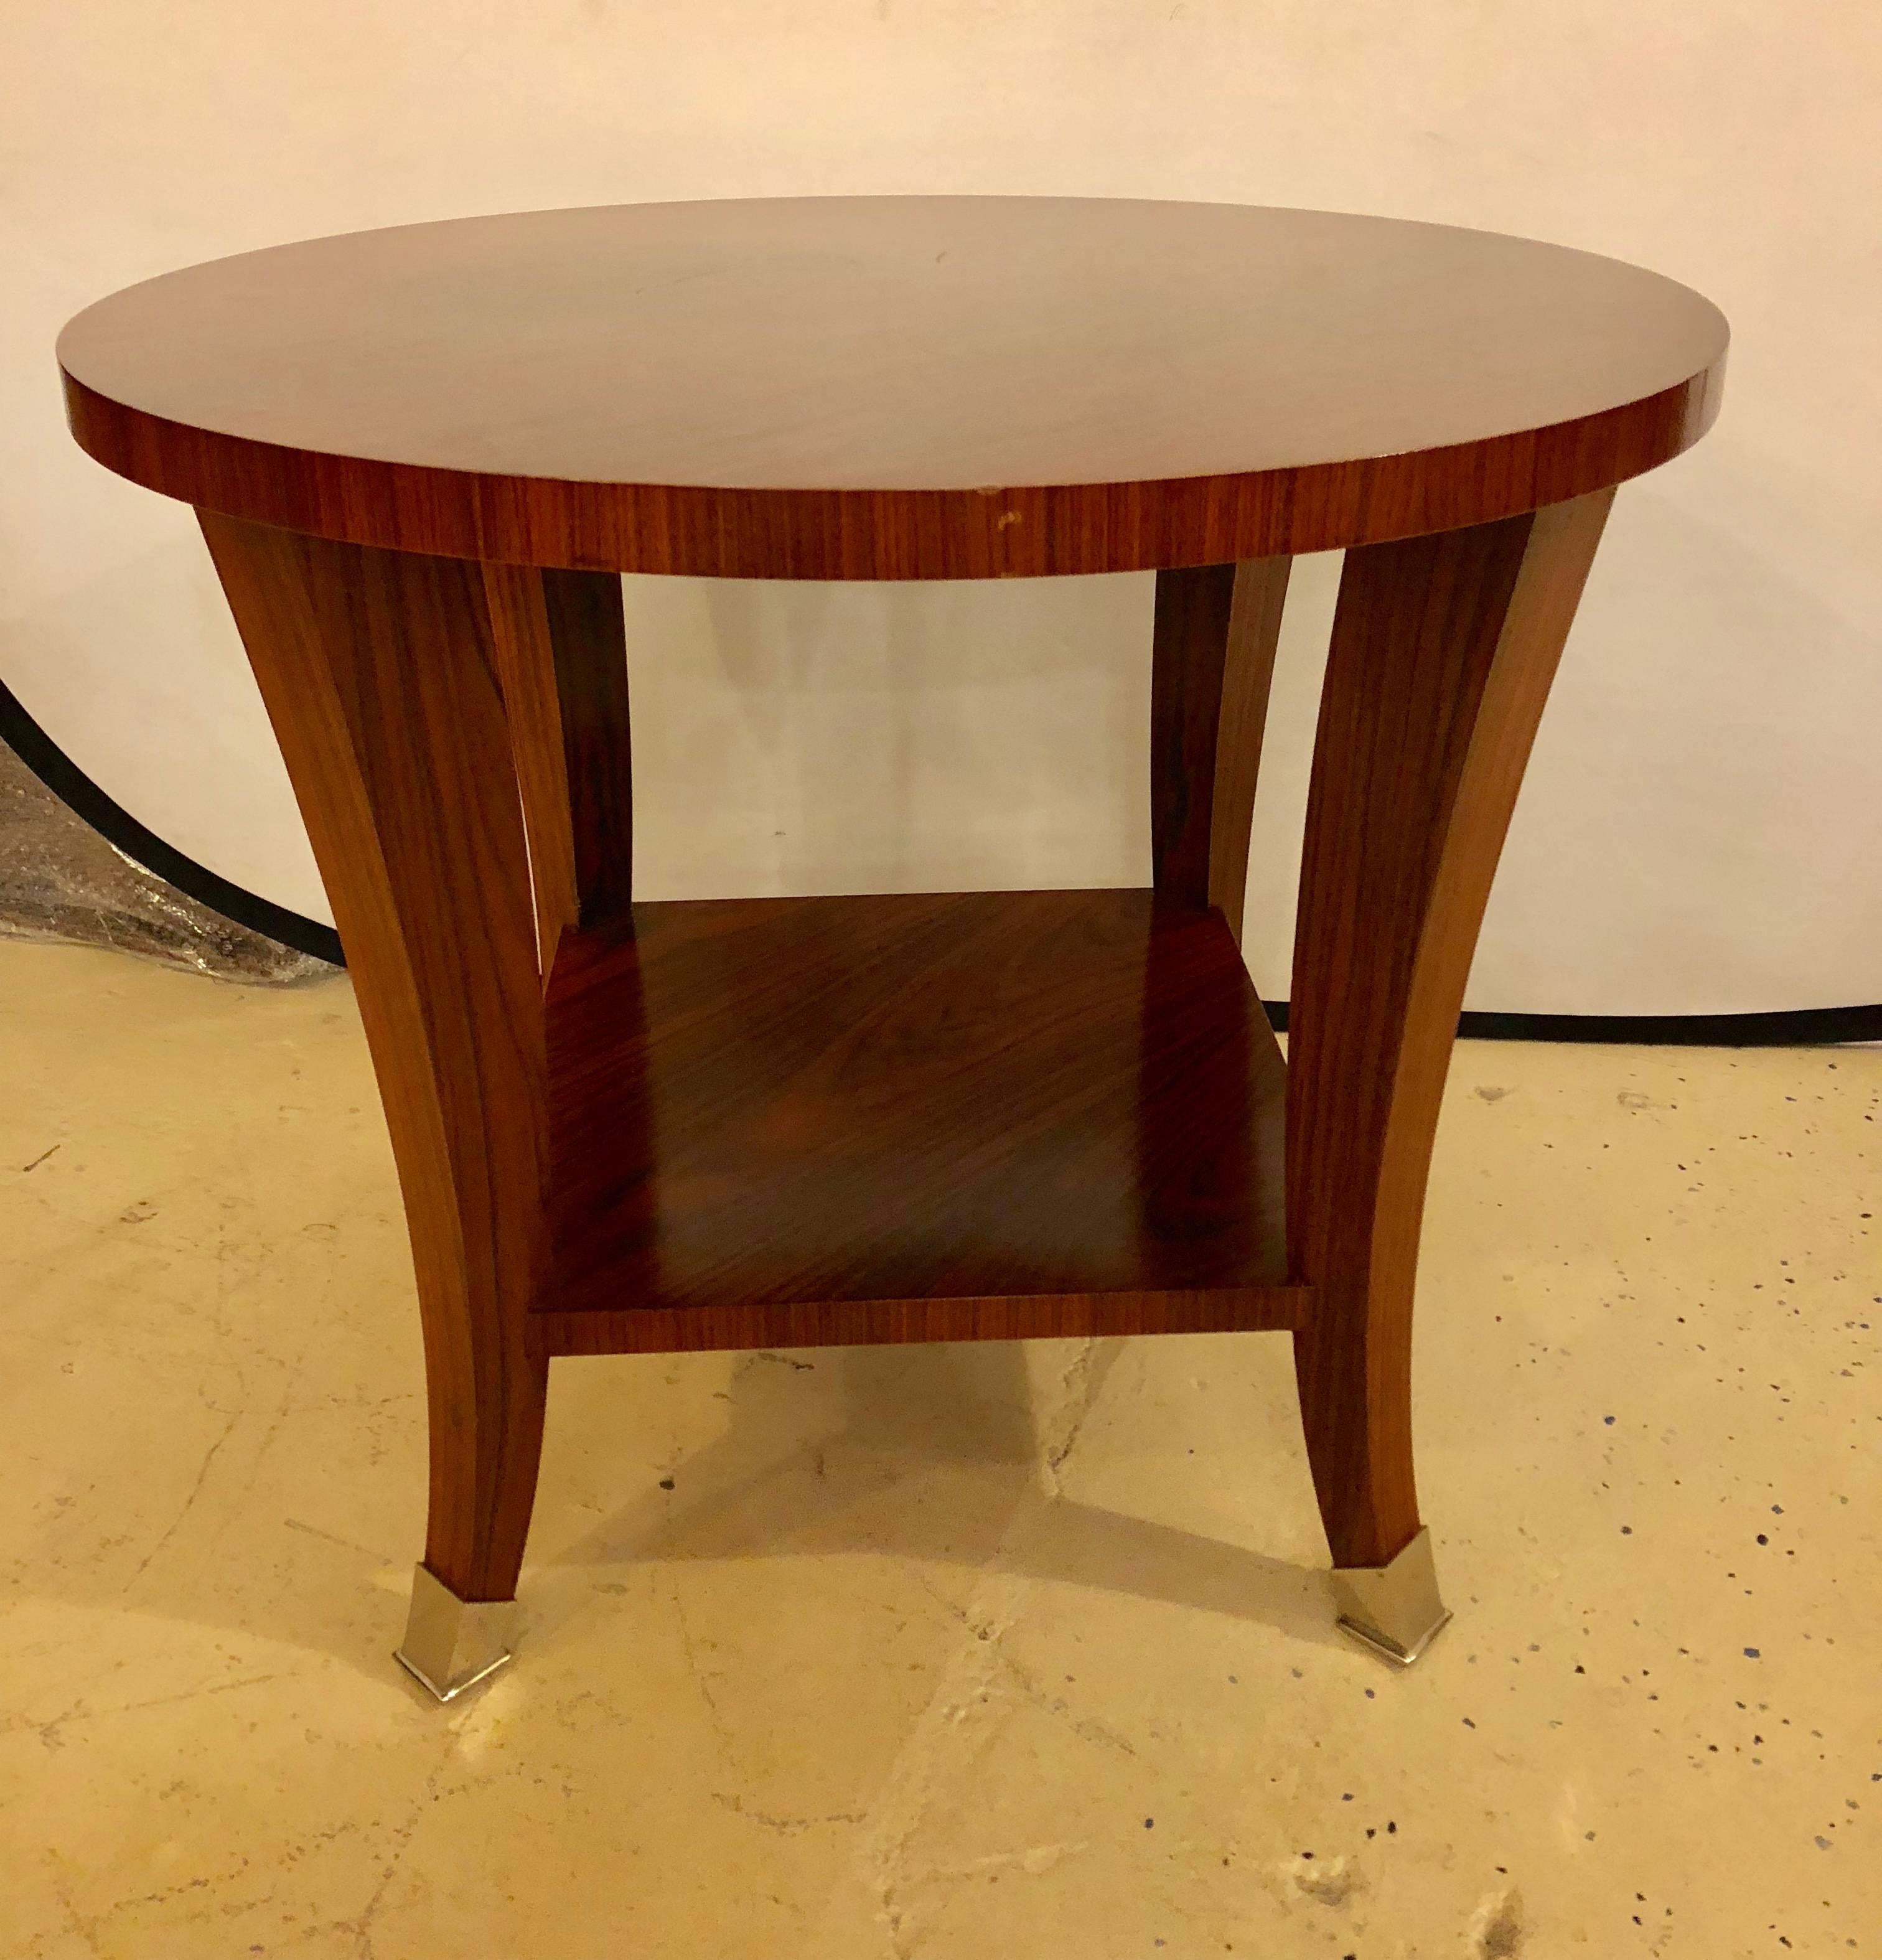 A rosewood baker end or lamp table designed by Barbard Barry. Having chrome feet and a lower shelf this very fashionable end table can be used in most any setting.